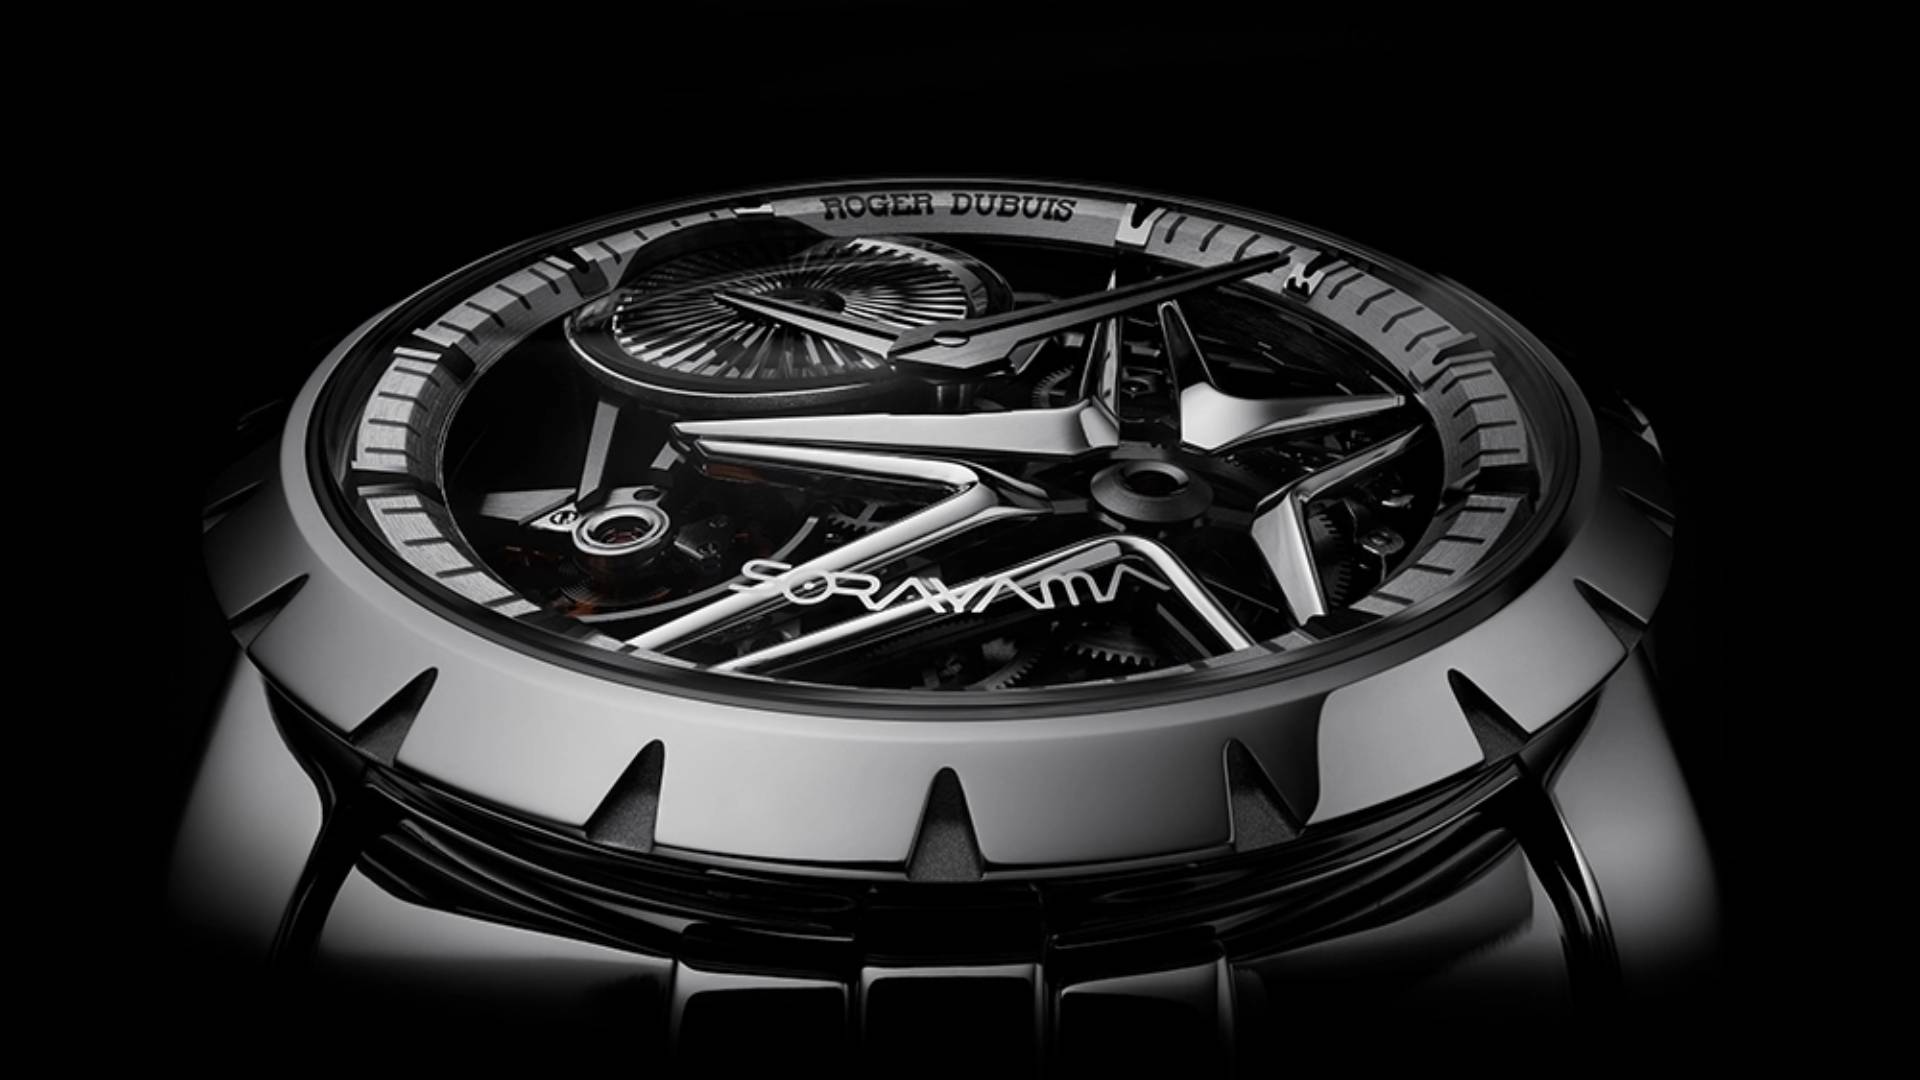 Roger-Dubuis-watch